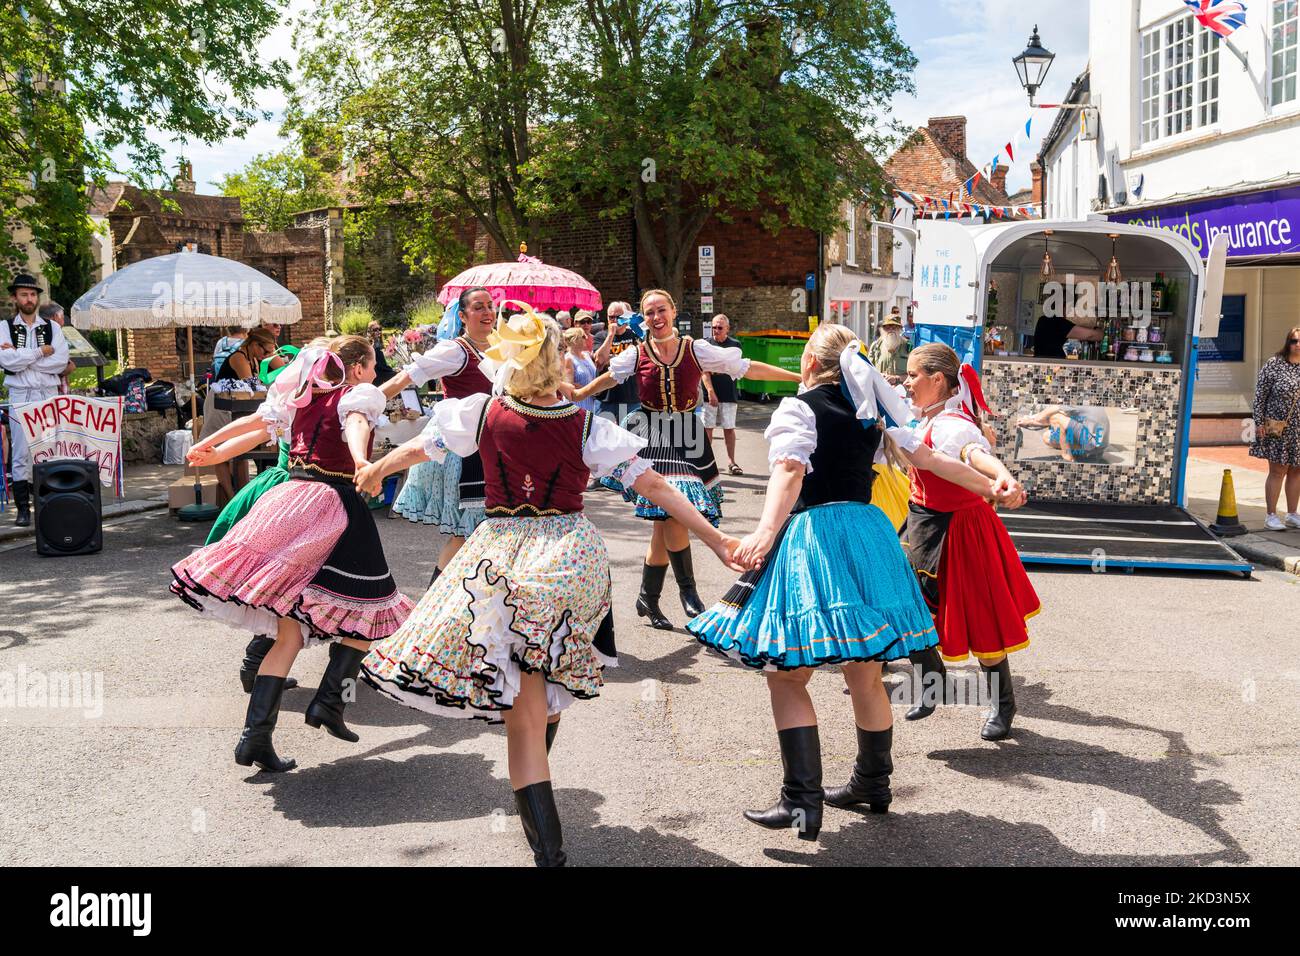 Bulgarian folk dancers in traditional costume dancing on the street at an event in the English medieval town of Sandwich in the summer. Stock Photo